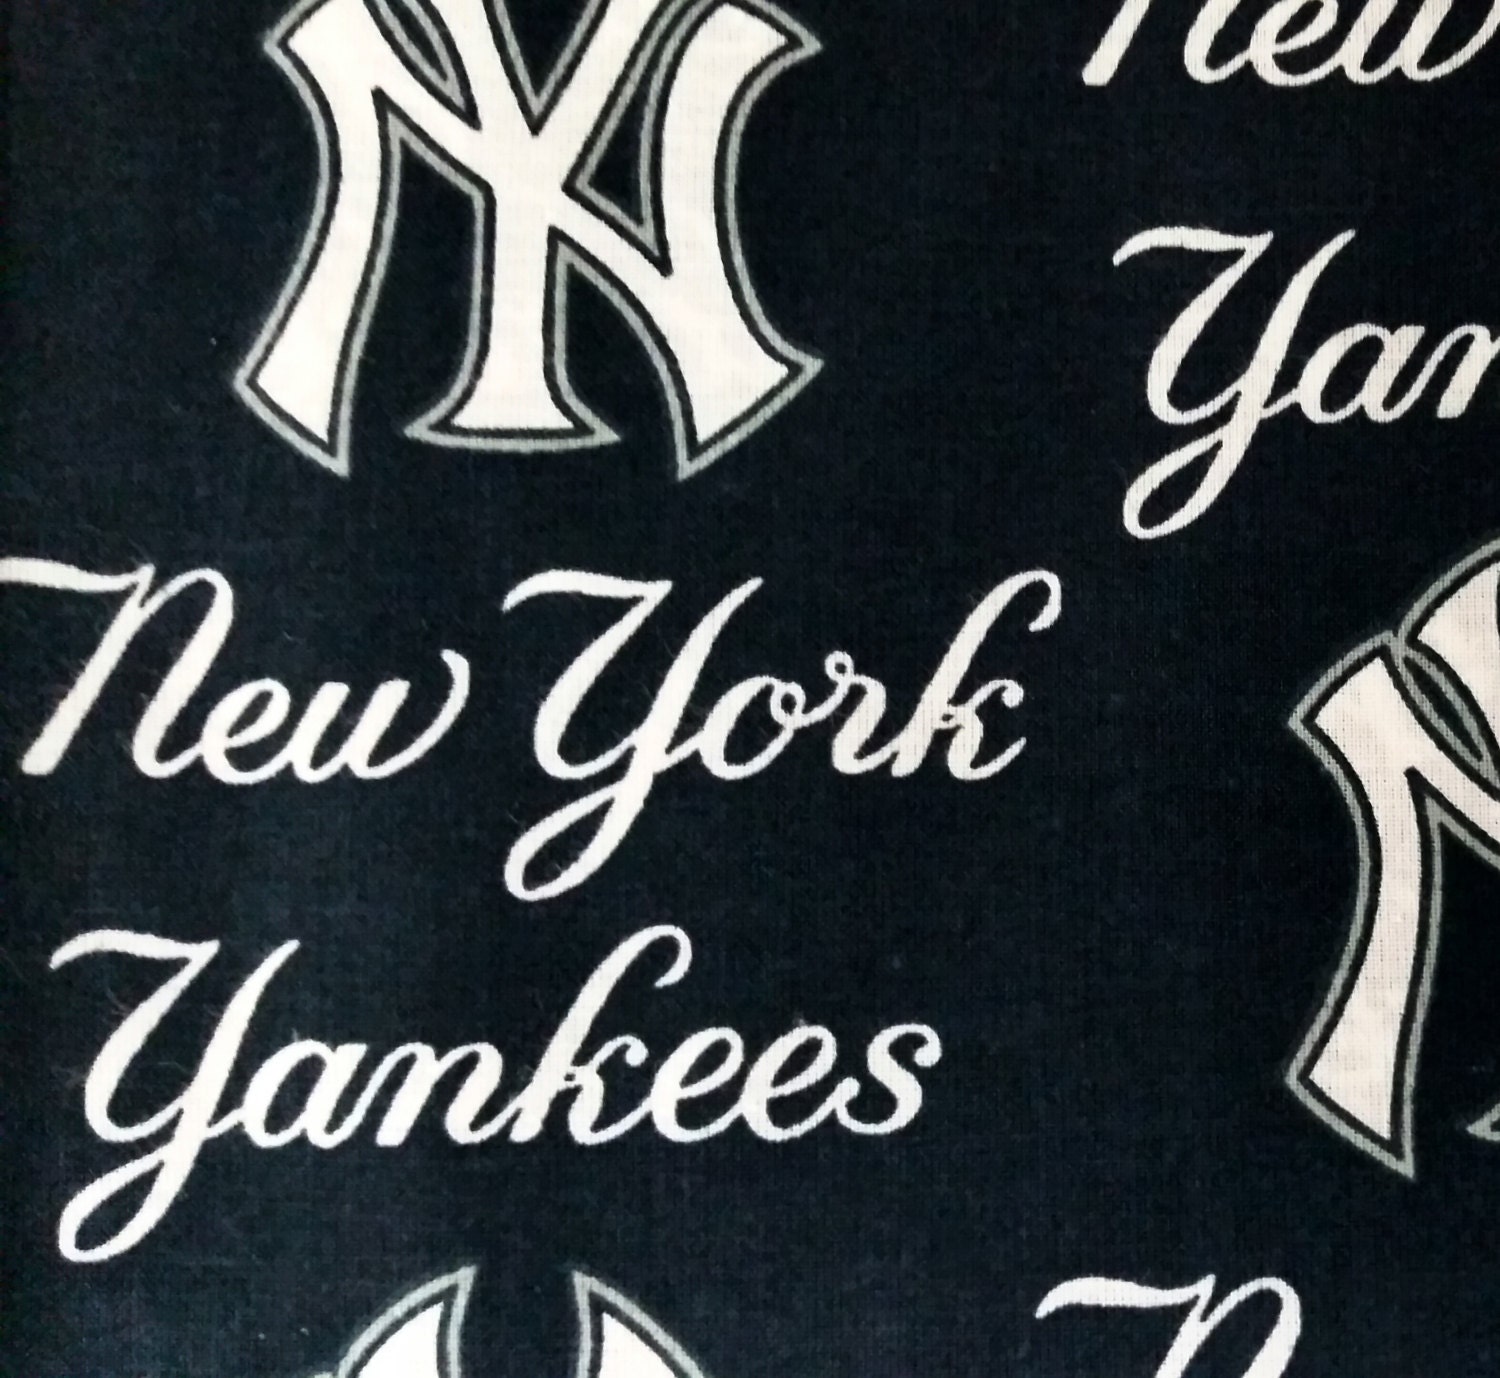 New York Yankees Fabric. (By The Yard) from AjsCraftsAndMore on Etsy Studio